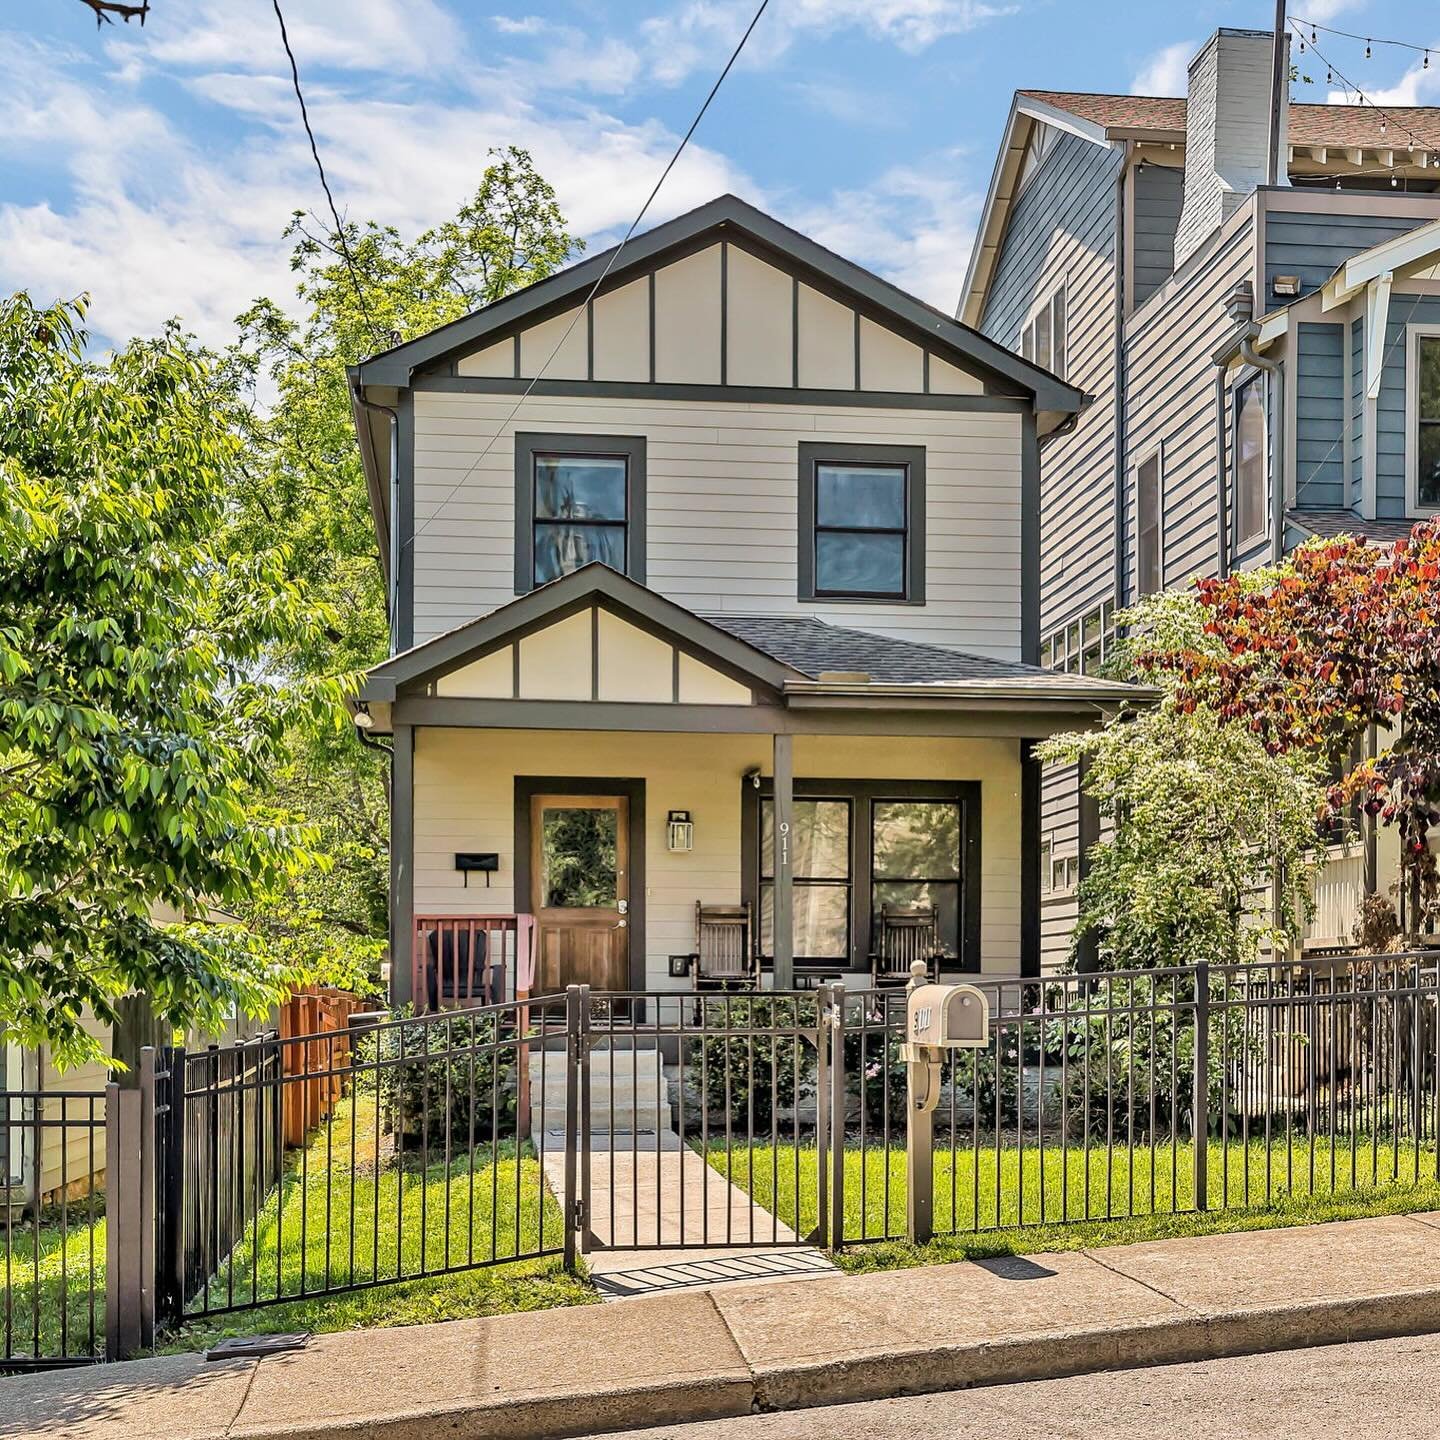 JUST LISTED in Hope Gardens/Germantown! 911 Warren st. Nashville TN🎉 
This 2130 sq ft. beauty in Germantown just hit the market for $799,000 (375 sq ft)!! This DETACHED home features a fenced lot, massive bonus room, first floor primary bed, large o